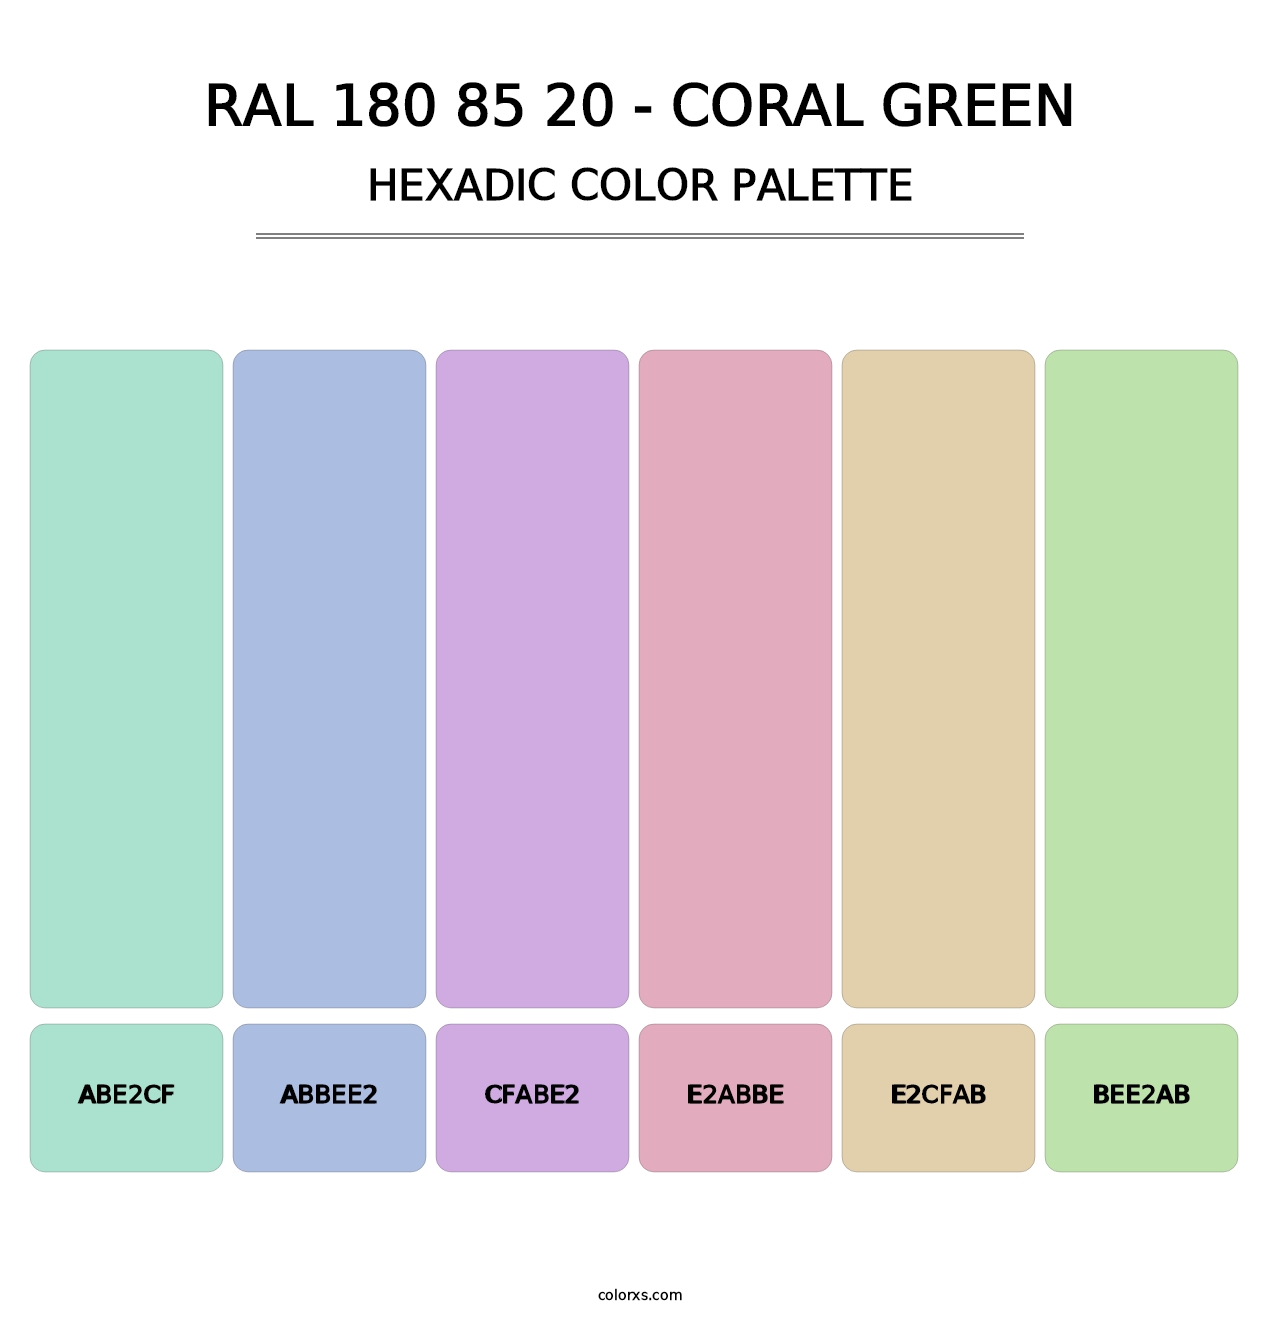 RAL 180 85 20 - Coral Green - Hexadic Color Palette